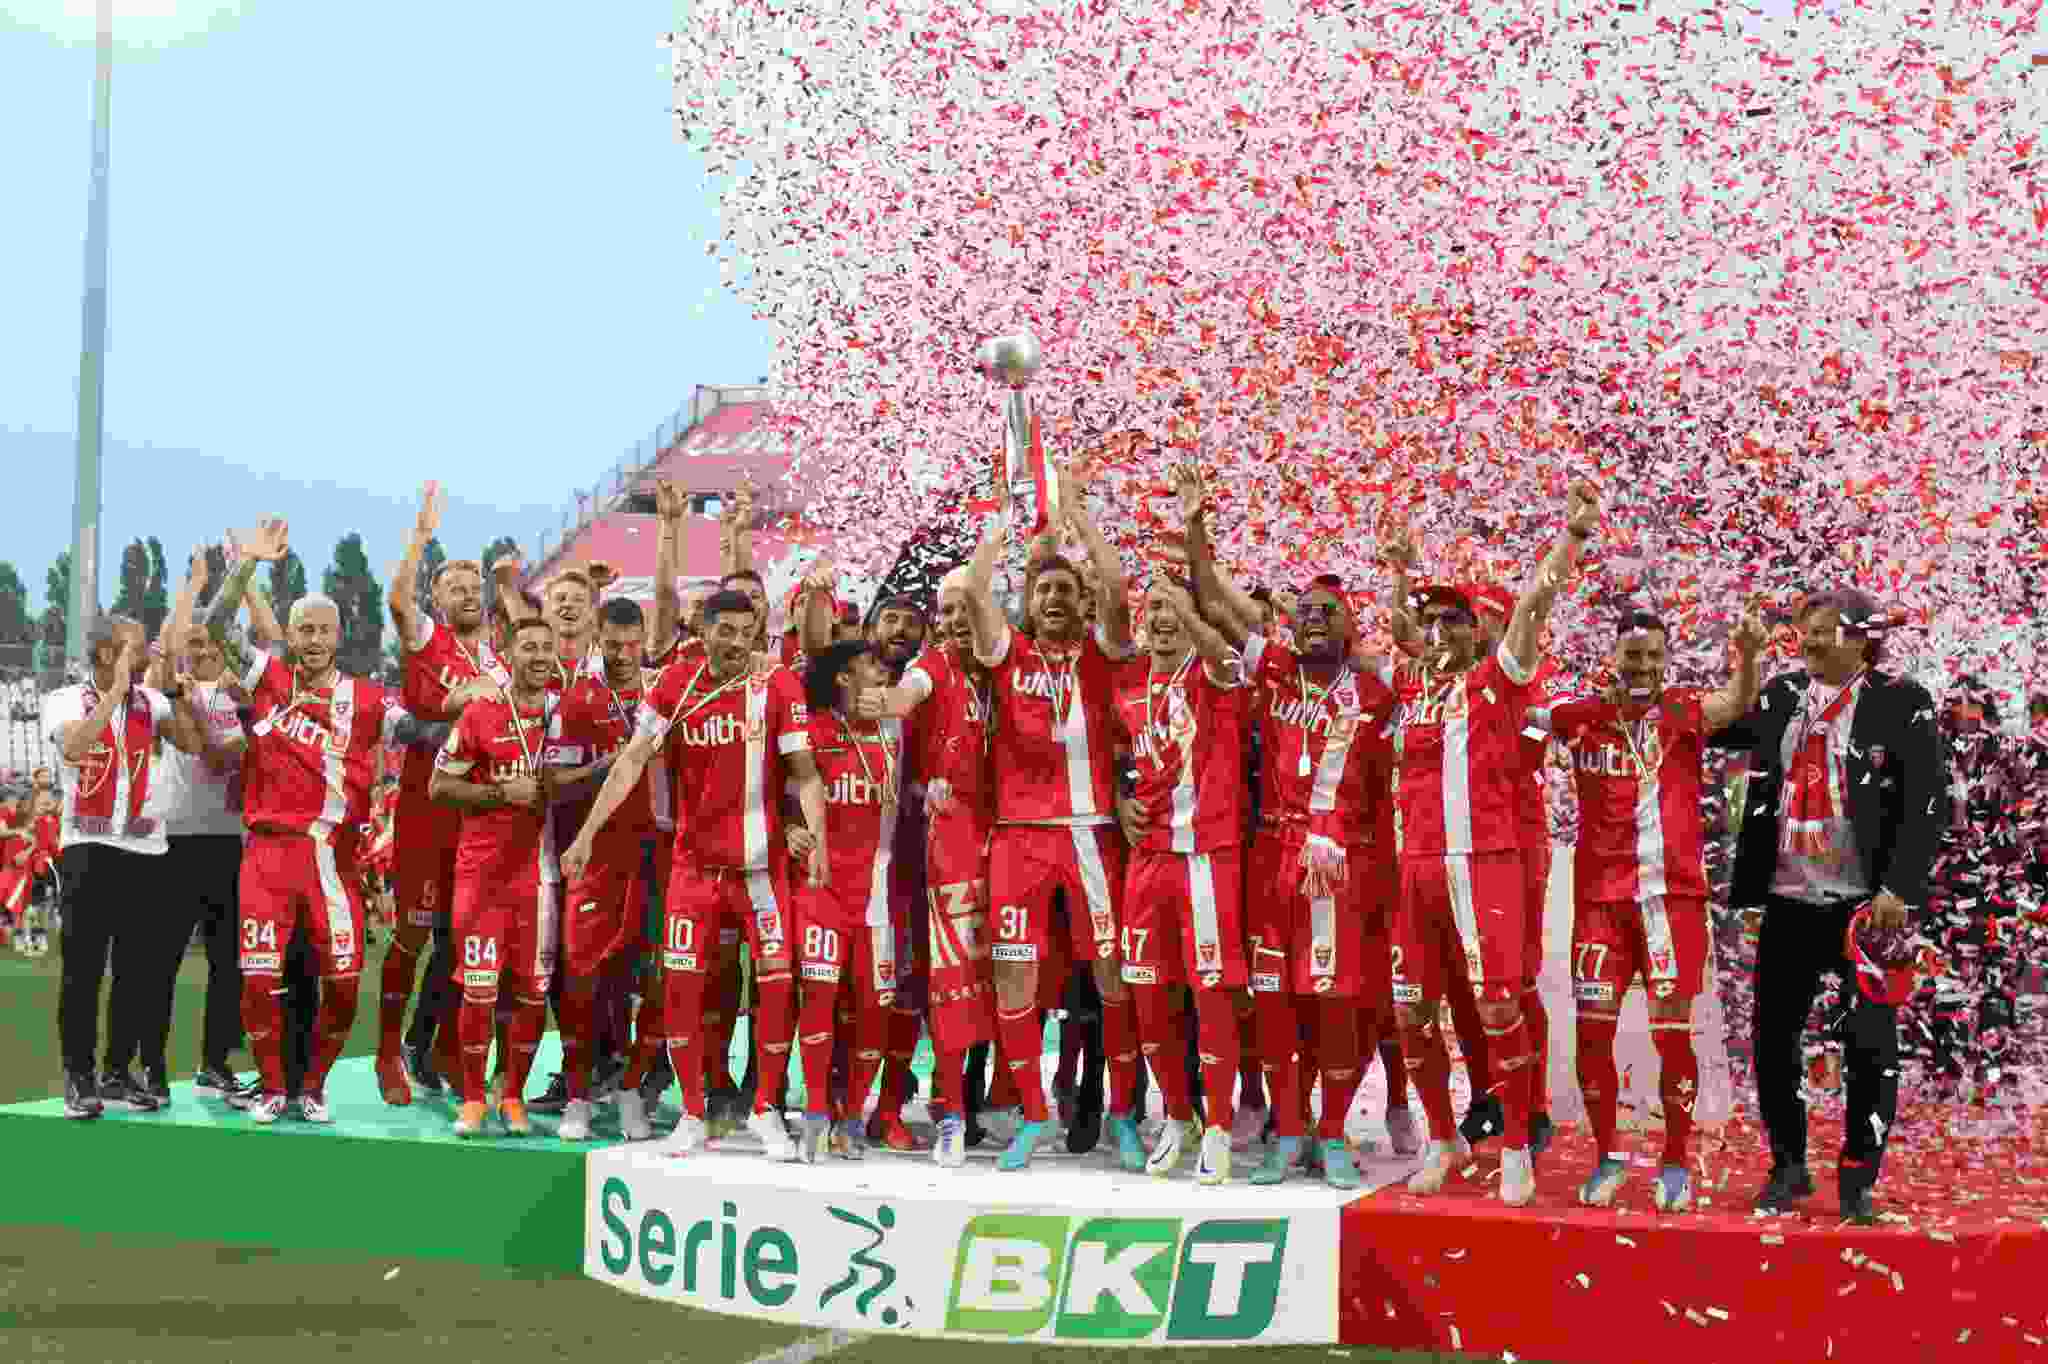 Meet The Newly Promoted Serie A Teams For The 2022/23 Season